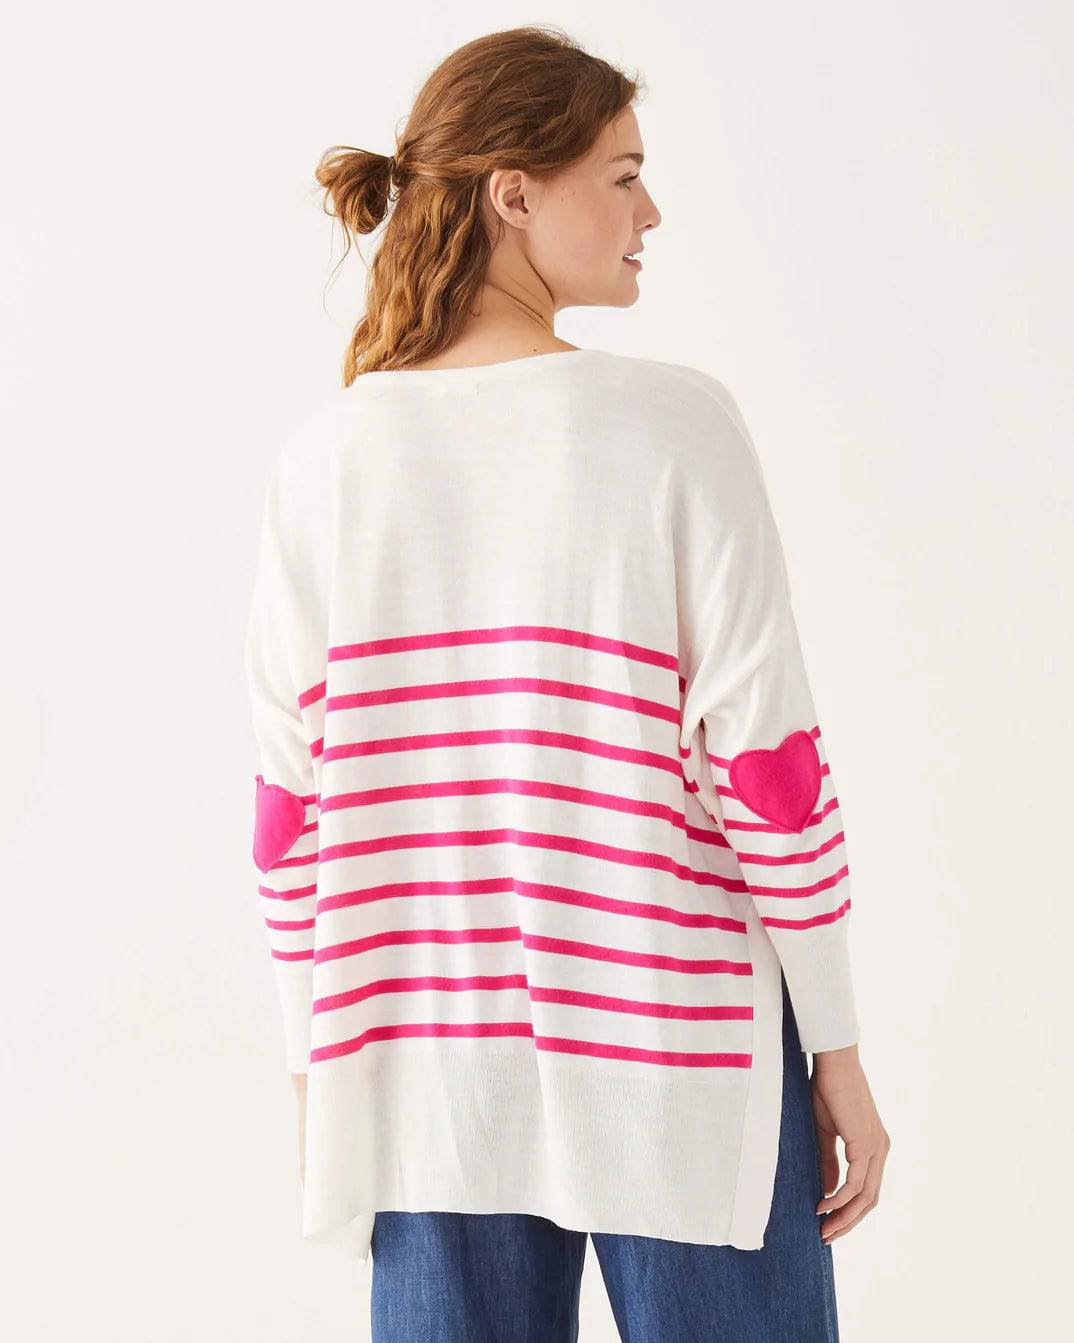 Amour Sweater with Heart Patch - White / Raspberry Stripe - One Size - The Preppy Bunny